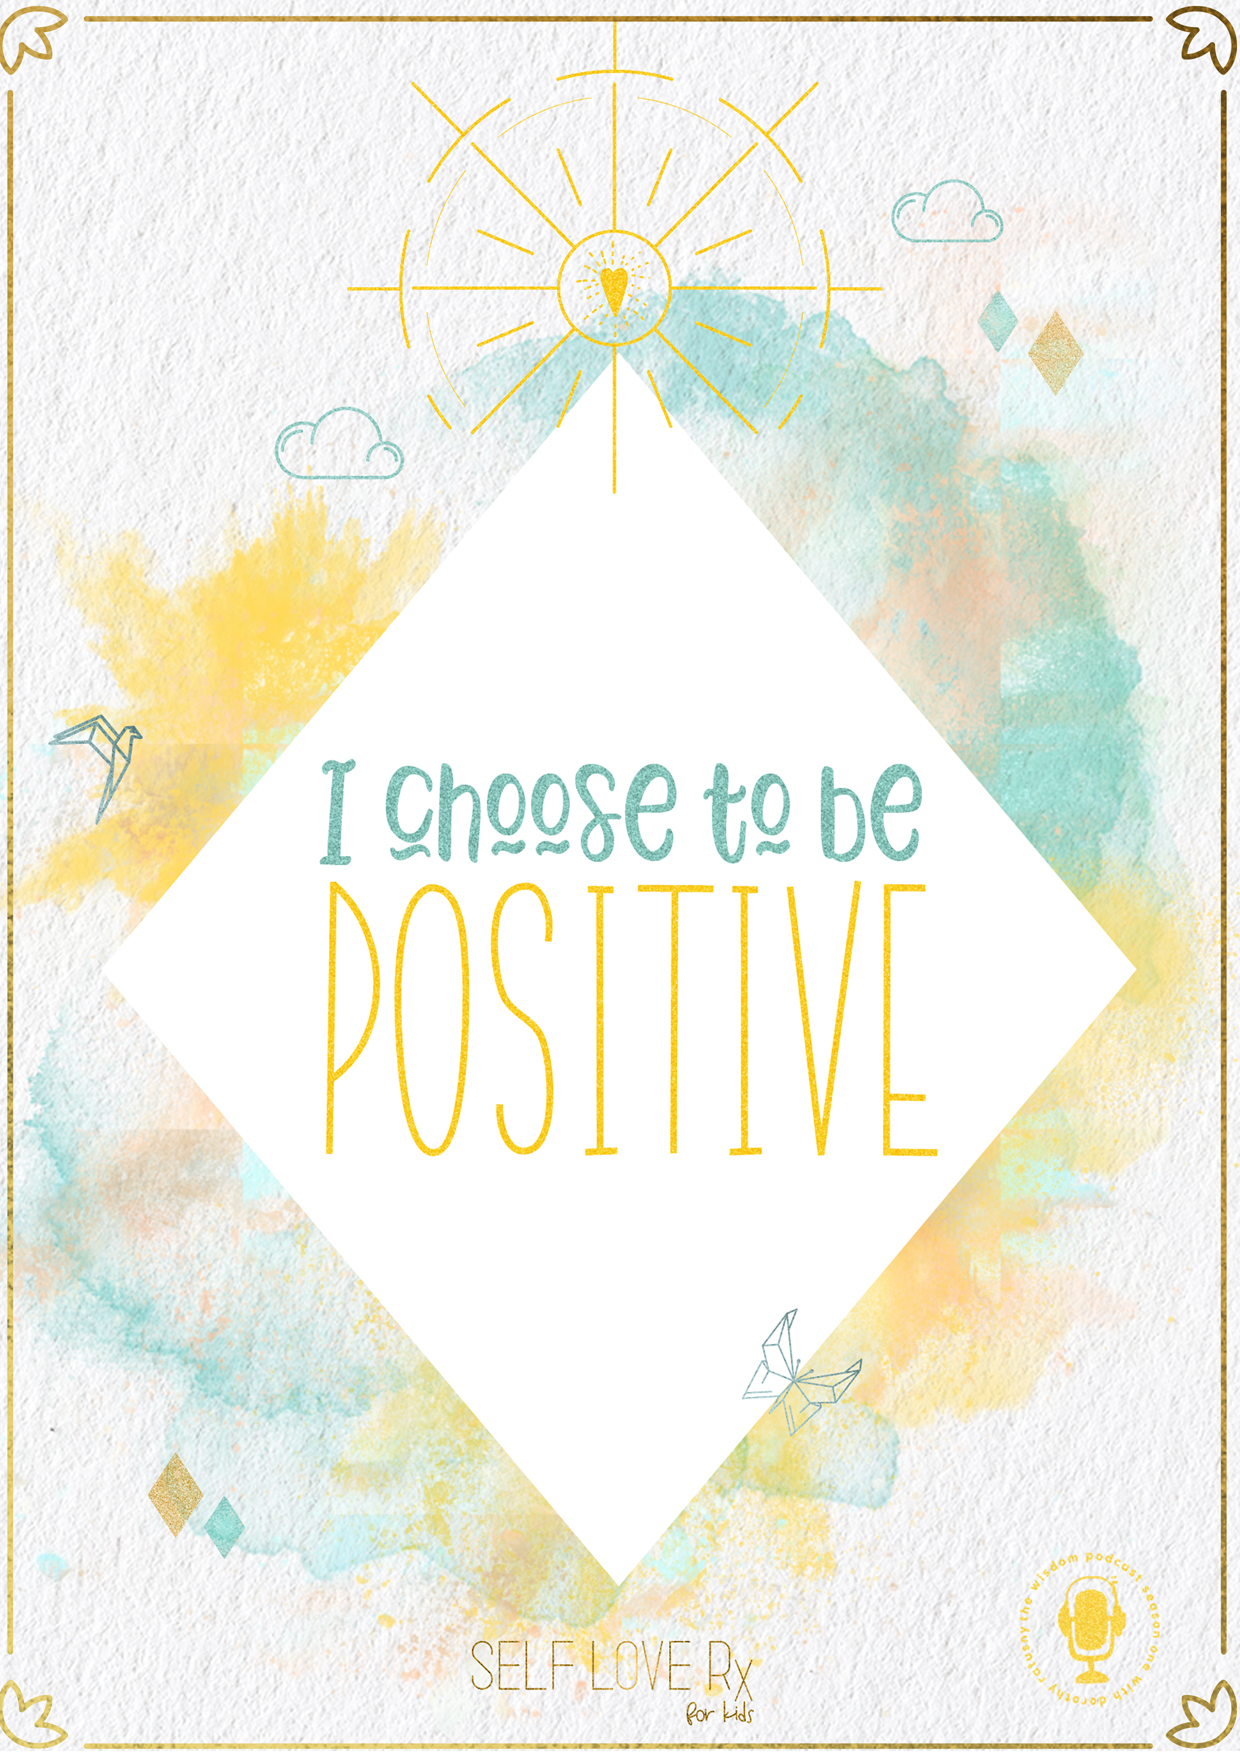 Self-Love Rx for kids - affirmation #1 | right click, save and set as device wallpaper " i choose to be positive" - daily affirmation card from the Self-love Rx for kids card deck - teaching children how to love and value themselves | the wisdom podcast season 1 episode 9